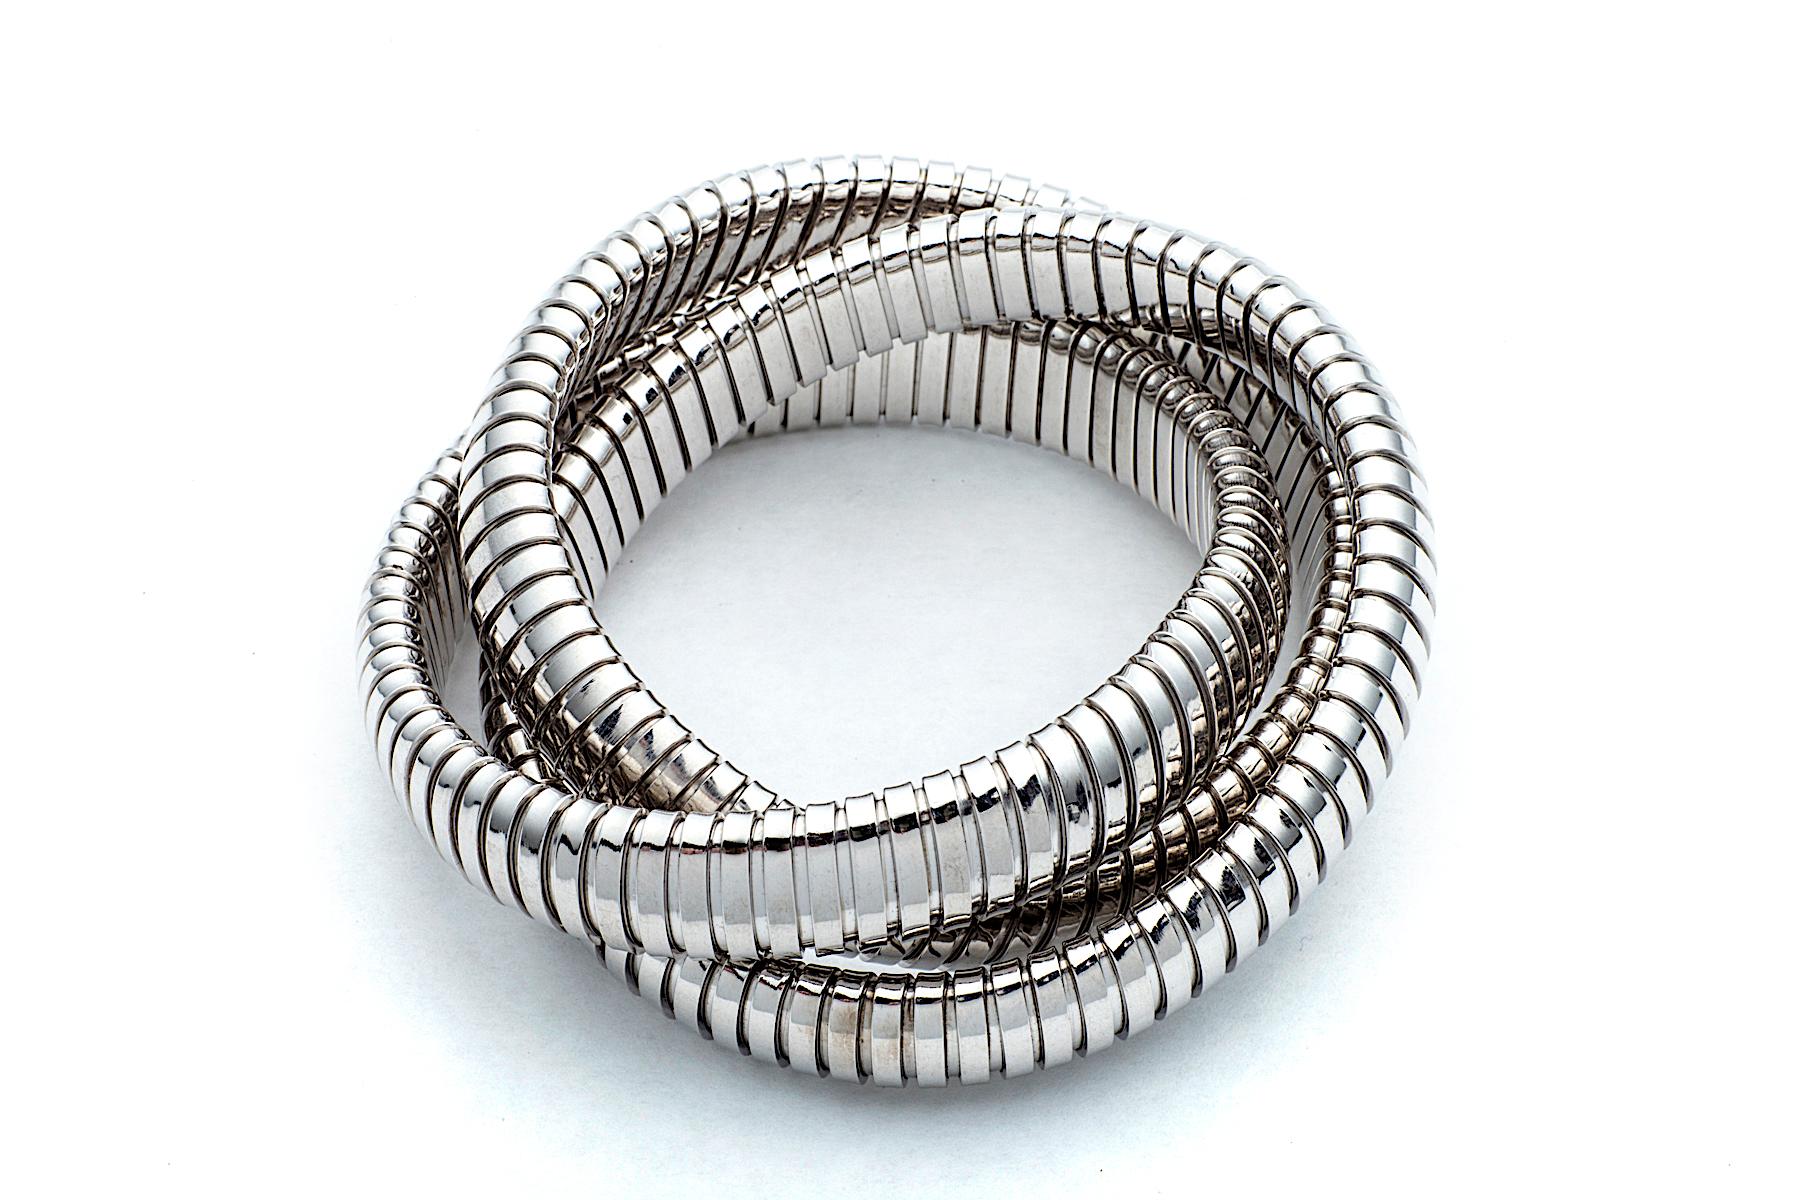 With a timeless but modern style, this chic intertwined 12 mm three strand tubogas rolling bangle bracelet was originally inspired by the flexible automotive gas tubing of the 1920’s.  Translated into sterling silver and easily stacked with other